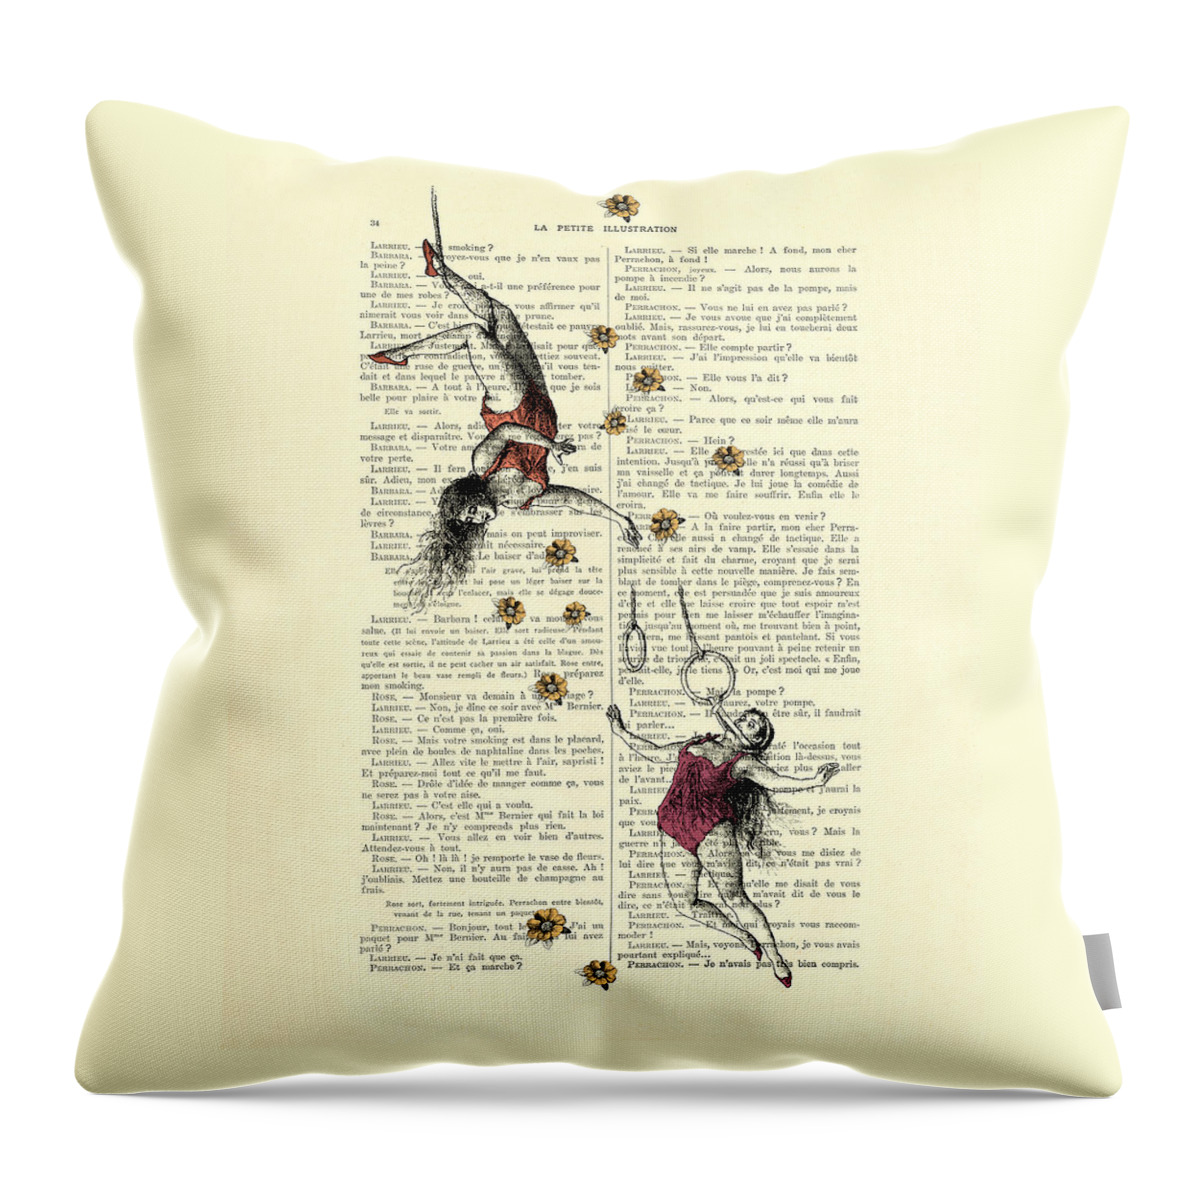 Acrobatics Throw Pillow featuring the digital art Acrobatics Women Circusact Vintage Illustration On Book Page by Madame Memento